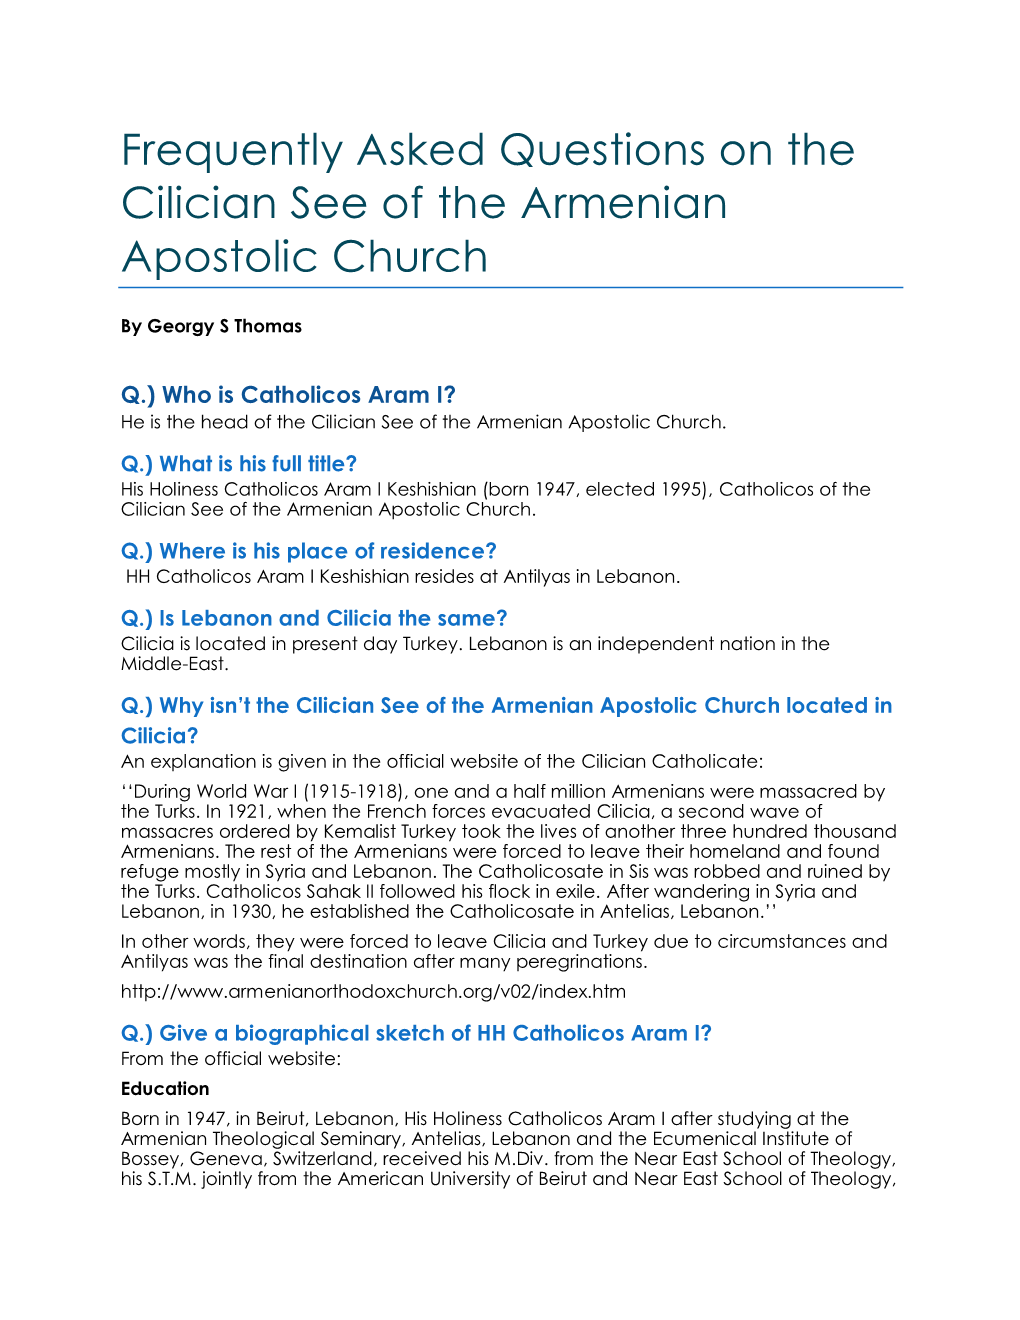 Frequently Asked Questions on the Cilician See of the Armenian Apostolic Church